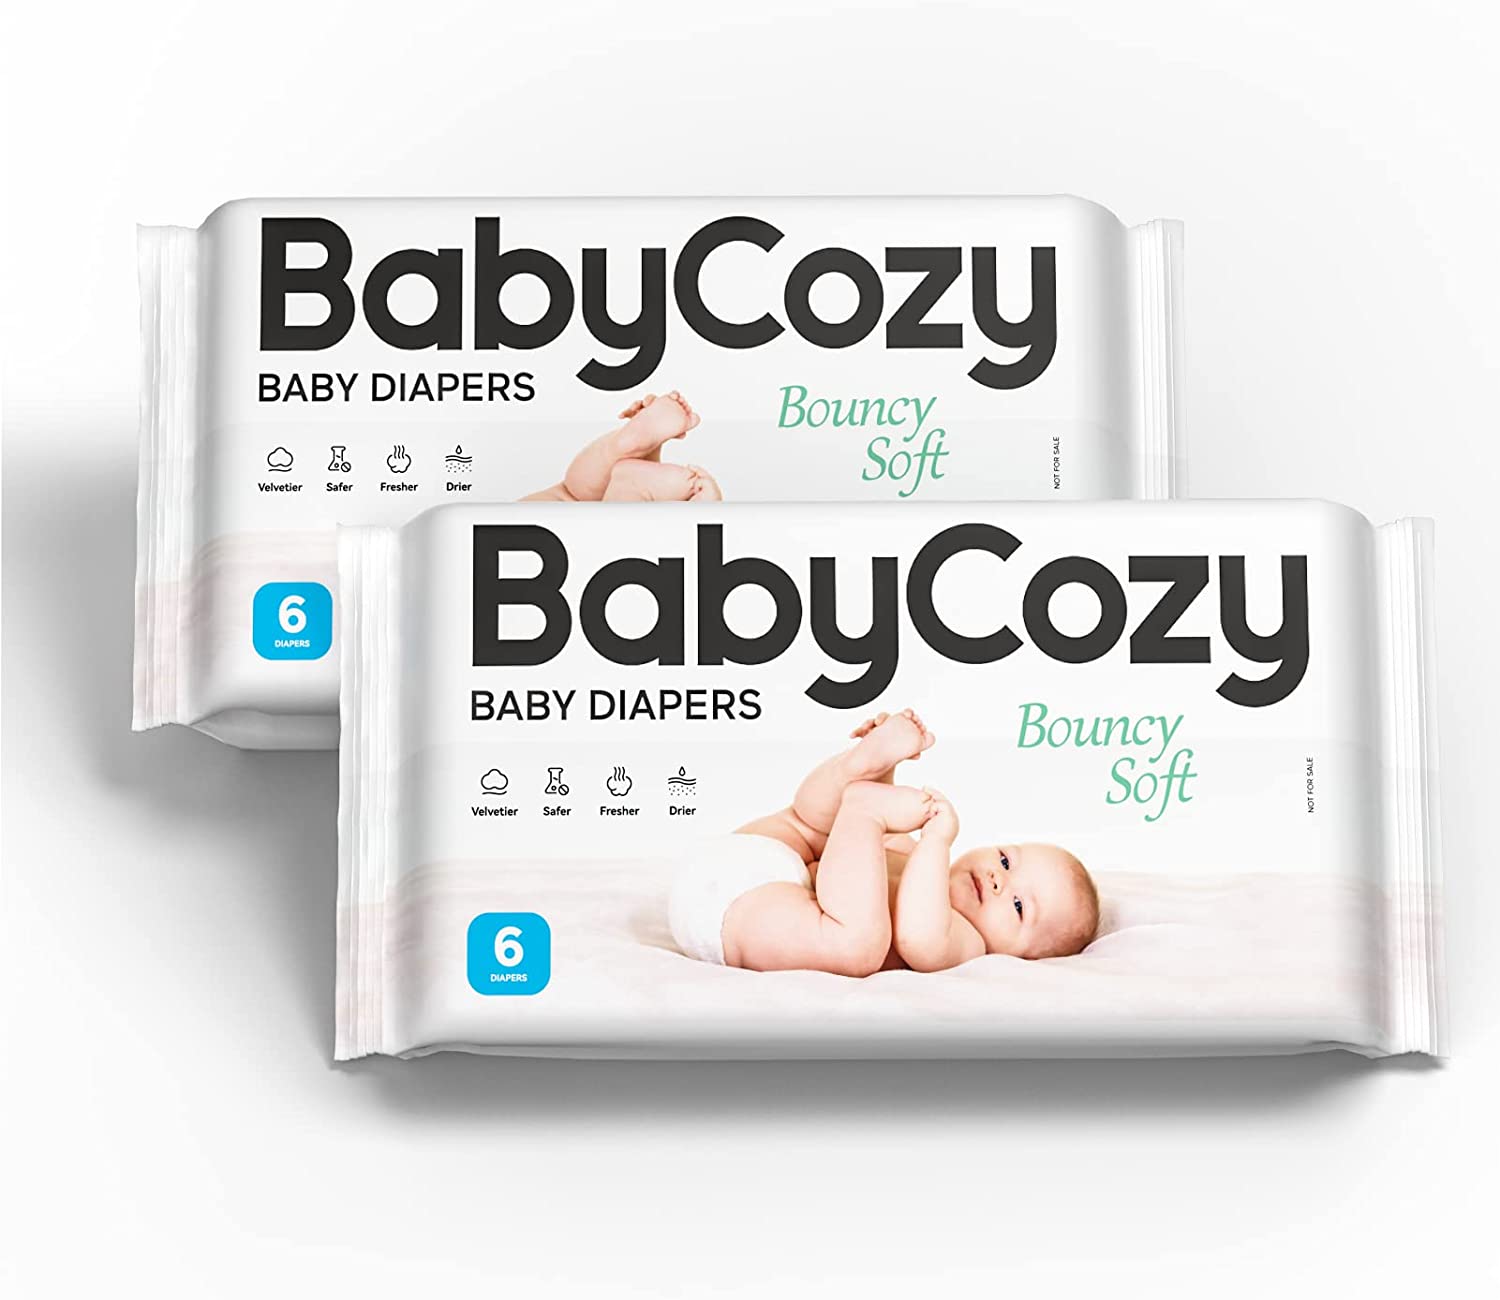 Baby Diapers Size 1(8-14lb) 12 Count Newborn Diapers, Babycozy Bouncy Soft Diapers Fit Baby Preemie, Dry Disposable Diapers Hypoallergenic Without Chlorine Safe for Sensitive Infant Skin